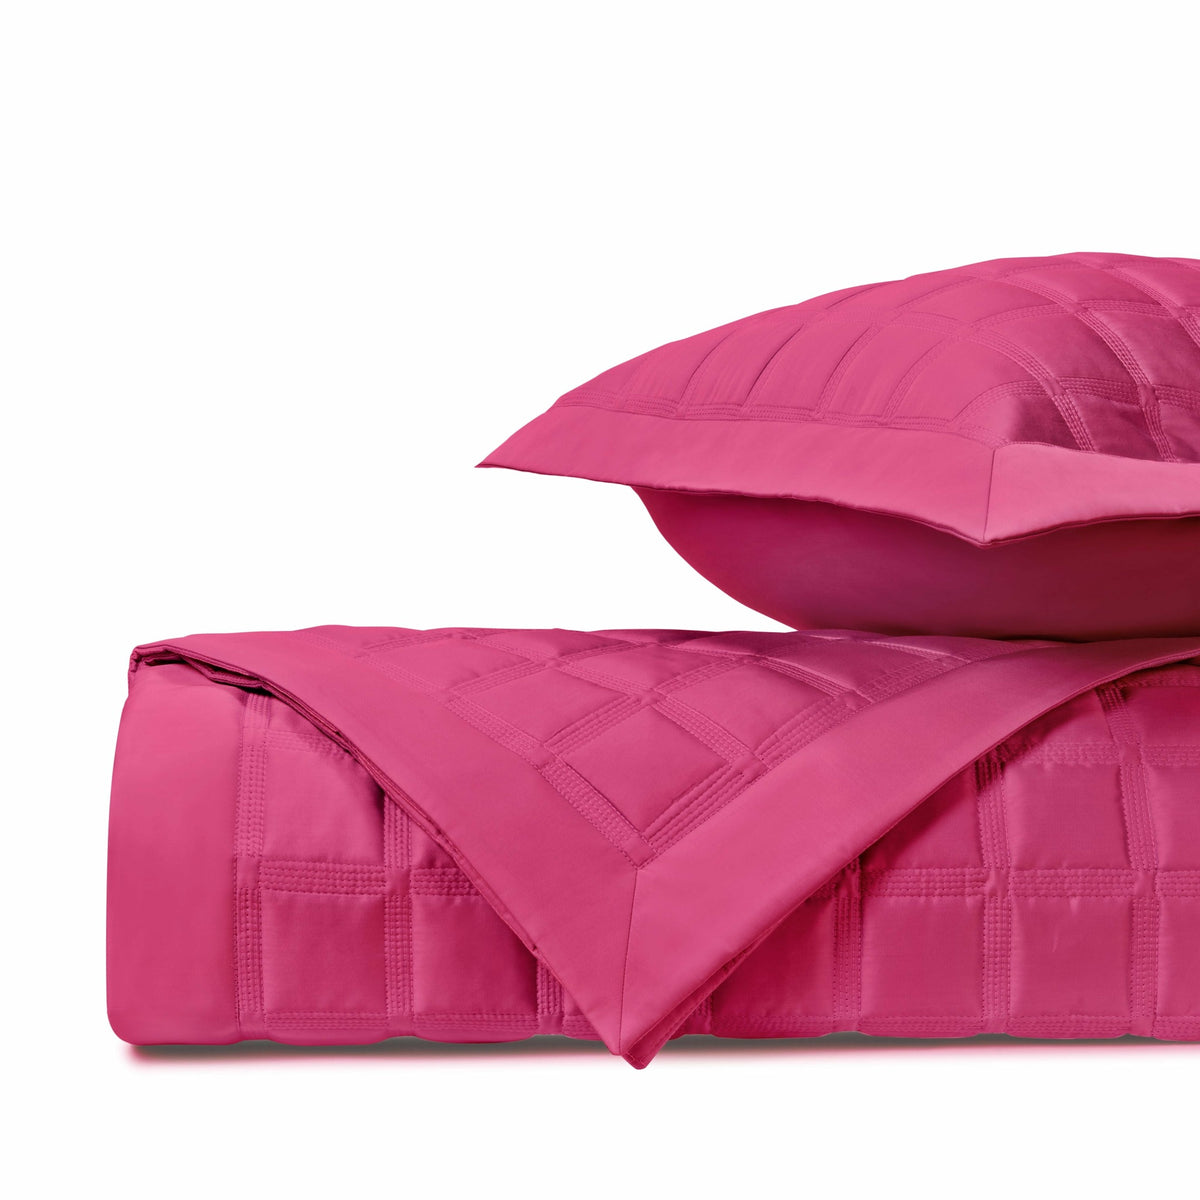 Home Treasures Athens Quilted Bedding Fine Linens Bright Pink